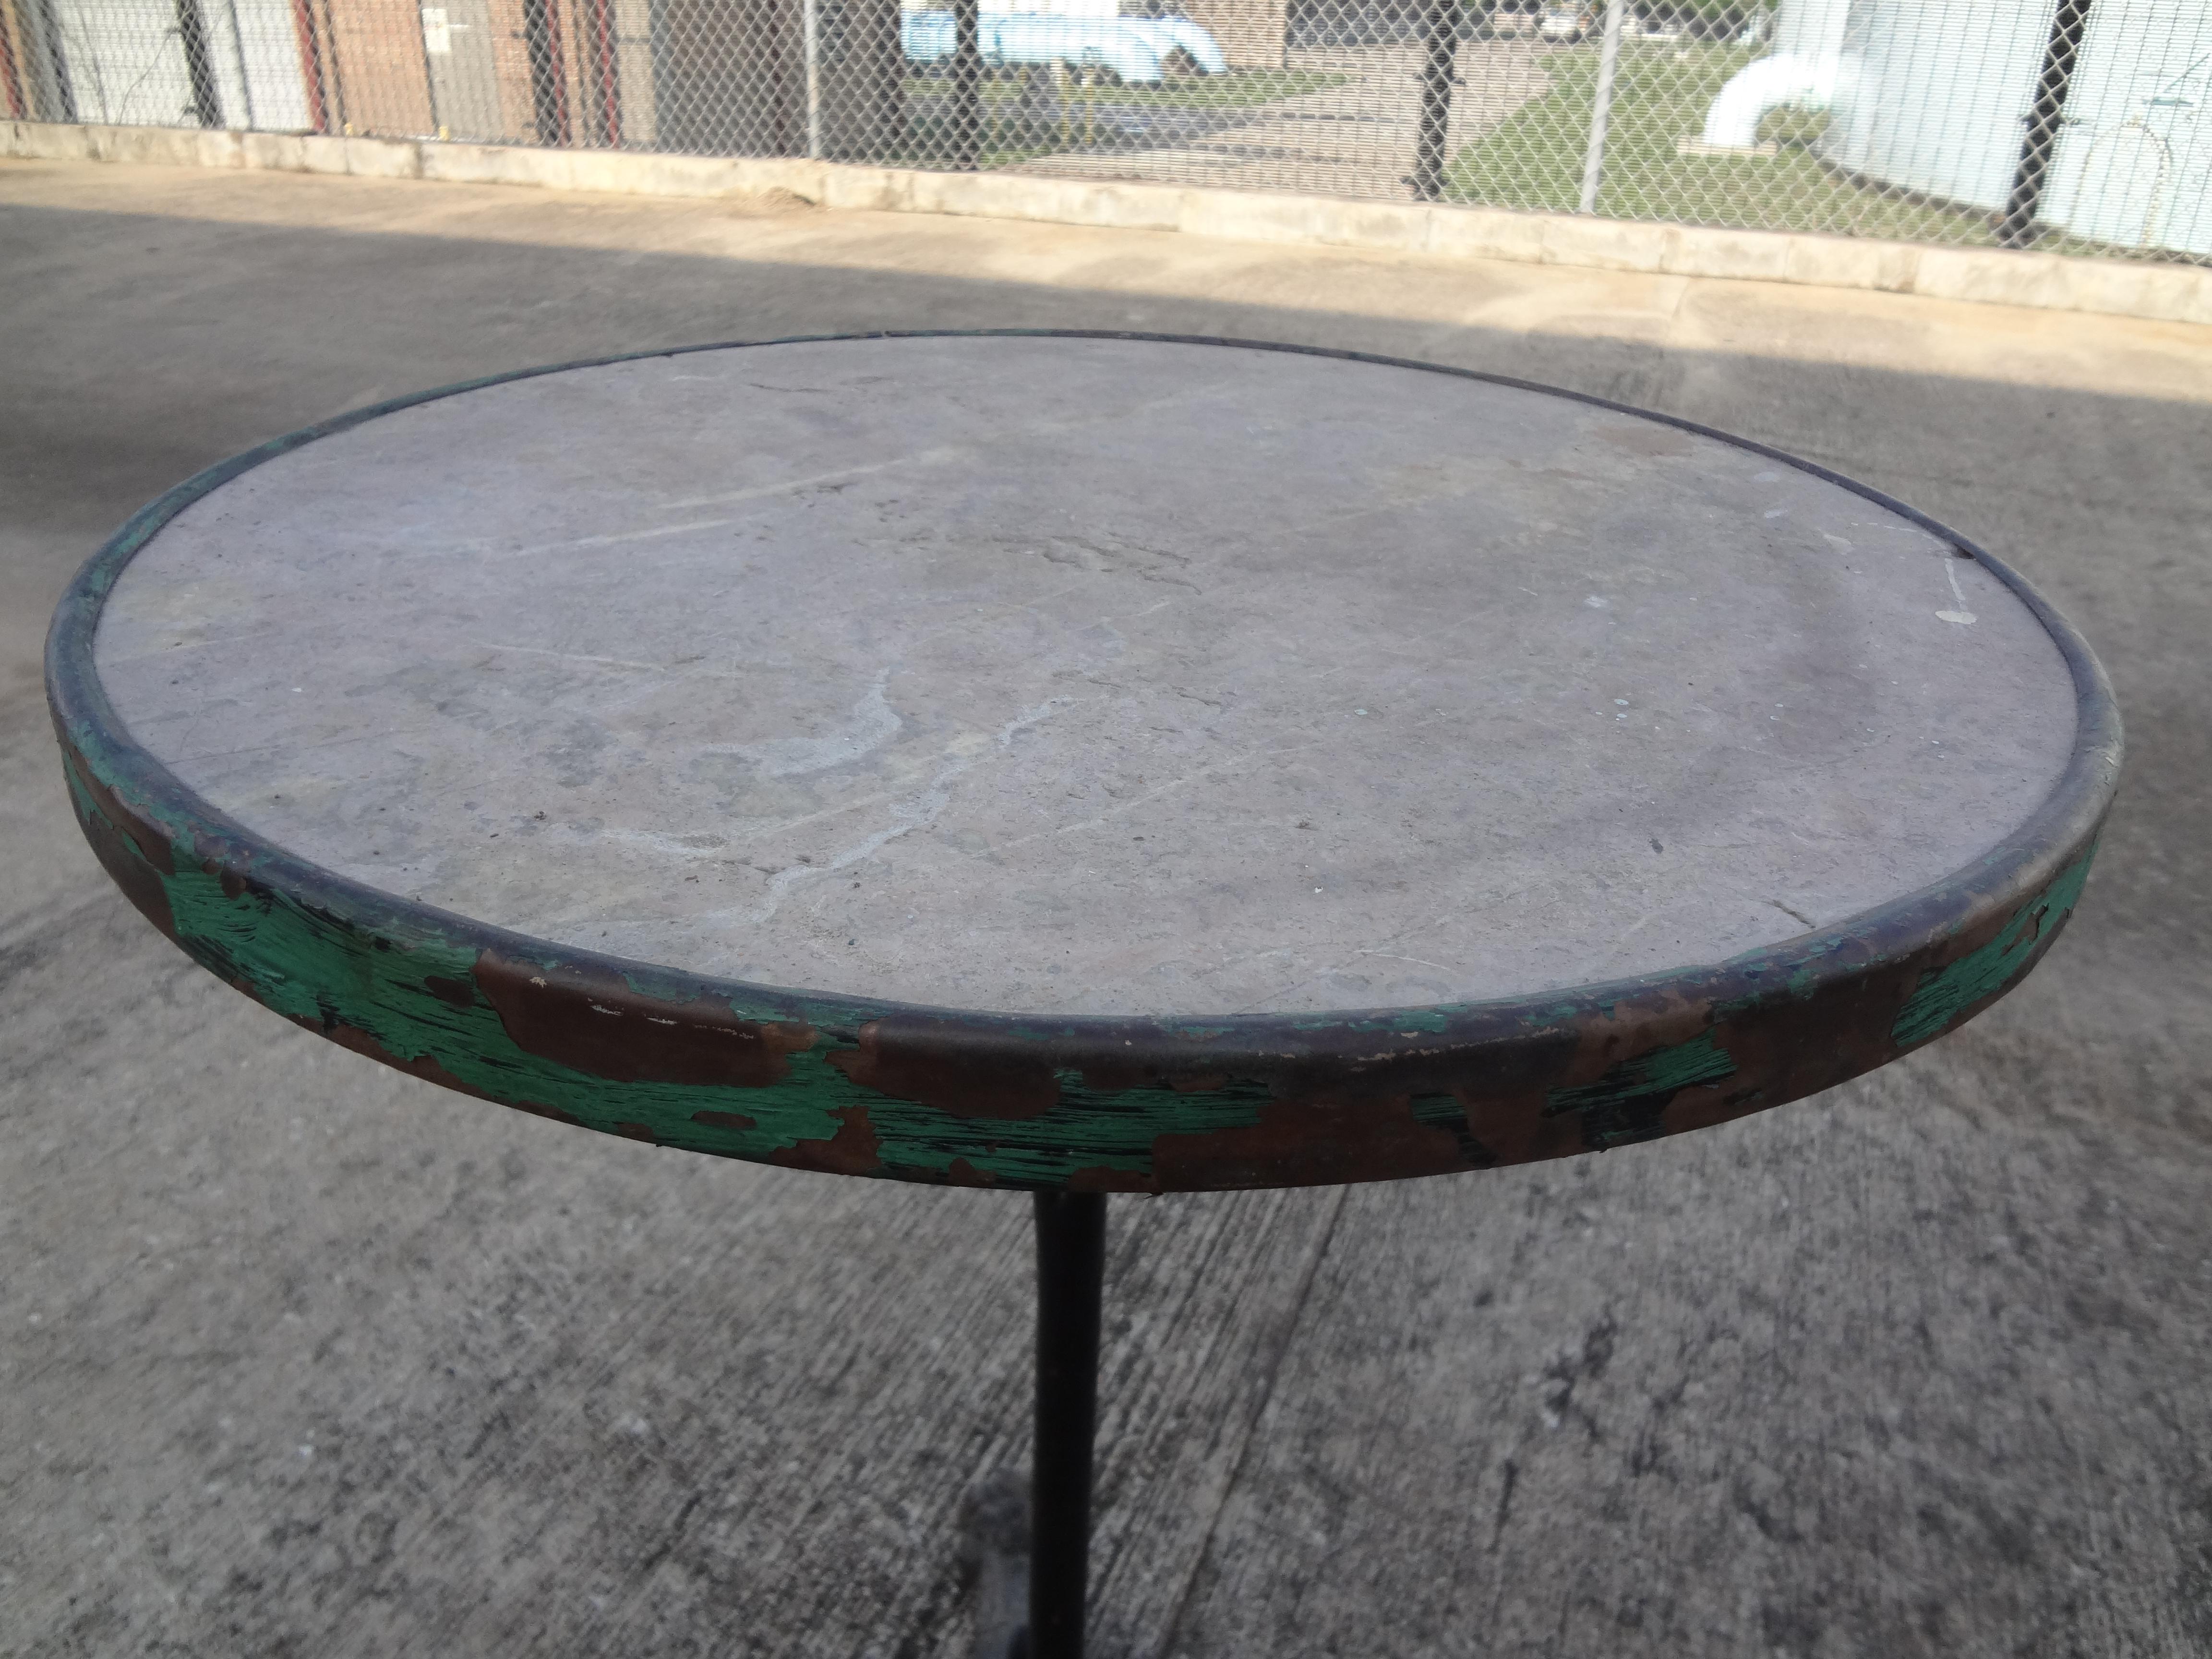 Charming antique French iron tripod bistro or garden table with a stone top. This great little table has a lovely distressed chippy oxidized patina. It would work equally as well indoors as a side table or drinks table or as a garden table.